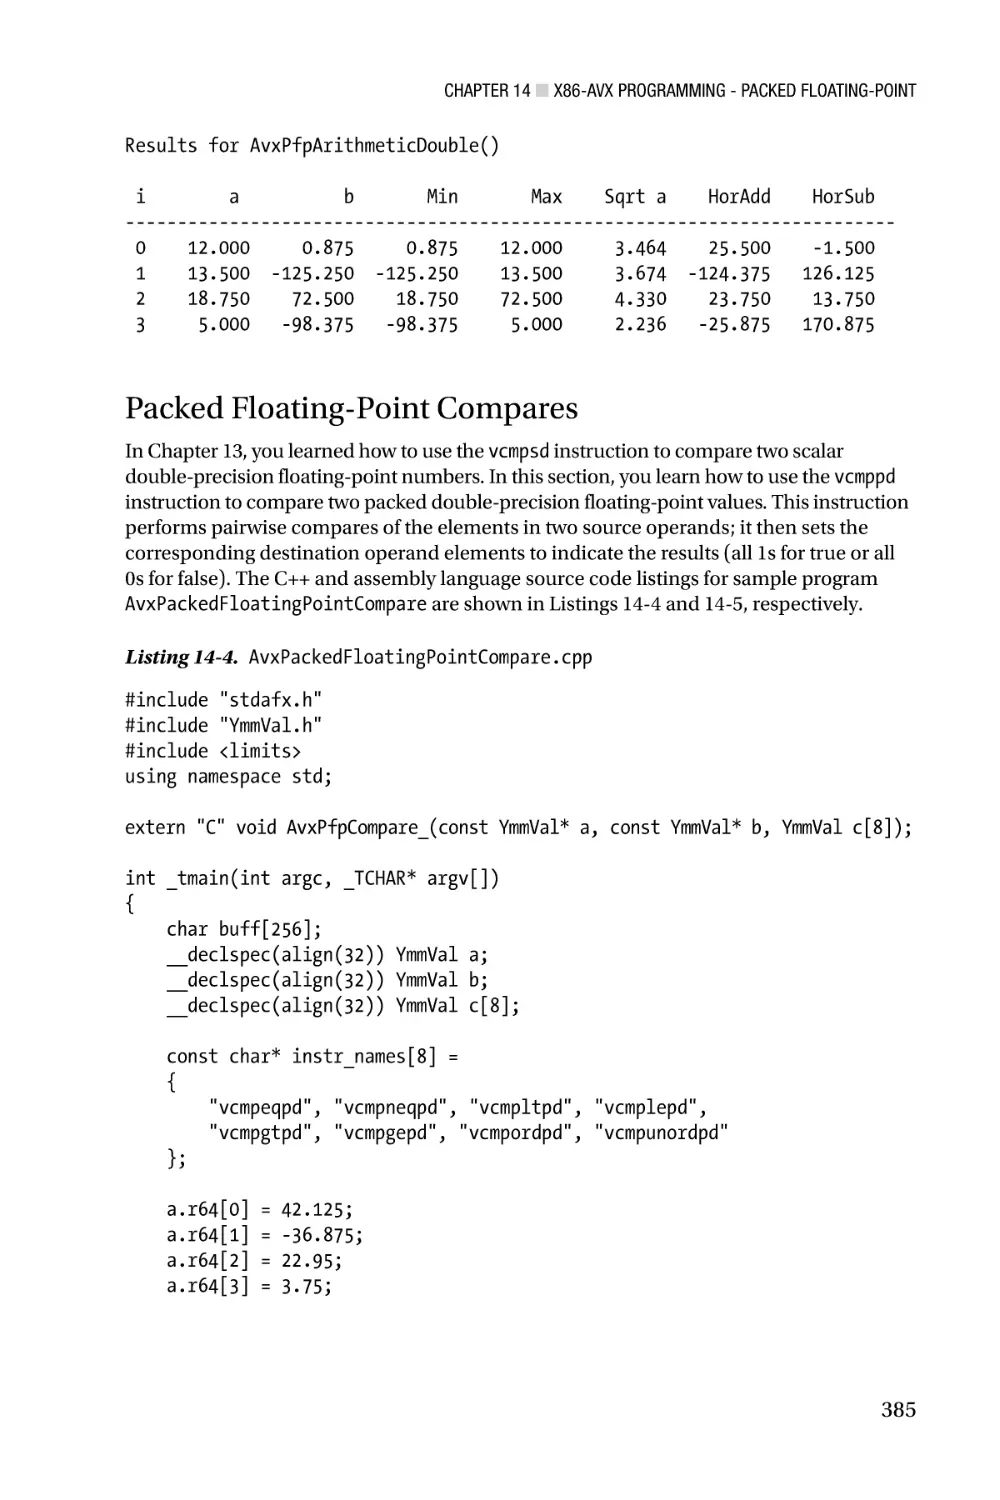 Packed Floating-Point Compares